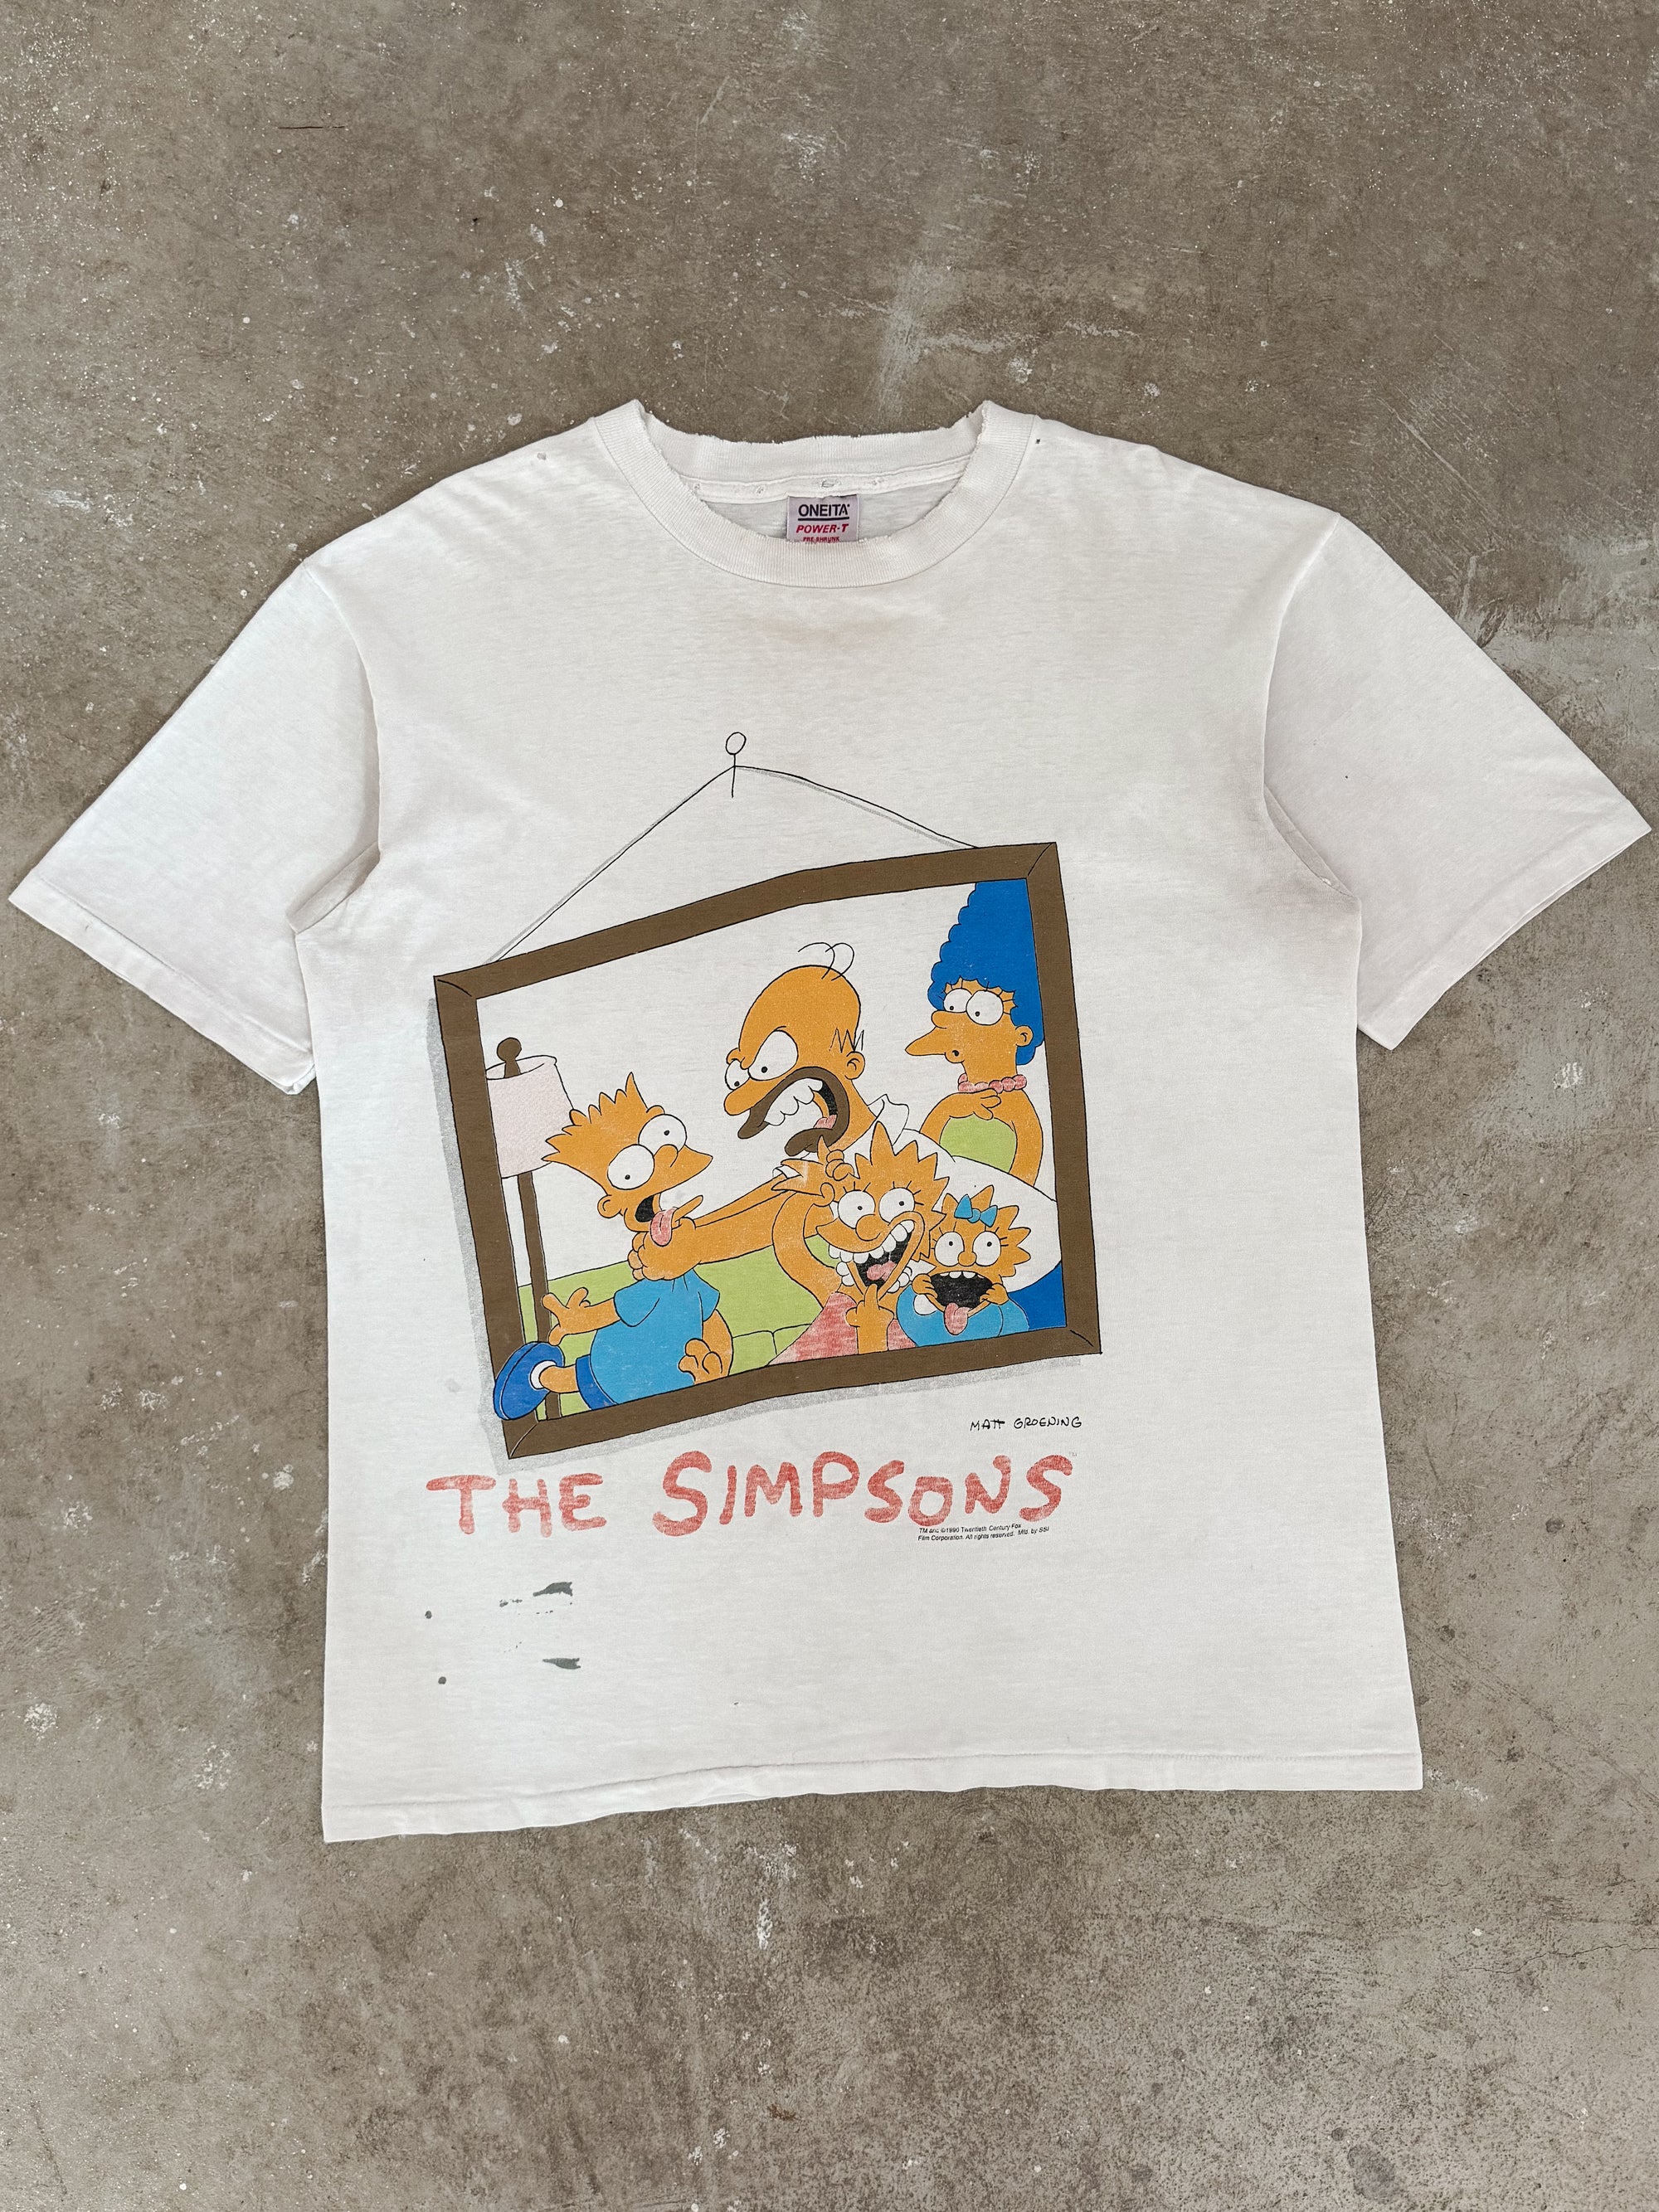 1990s "The Simpsons" Distressed Tee (L)